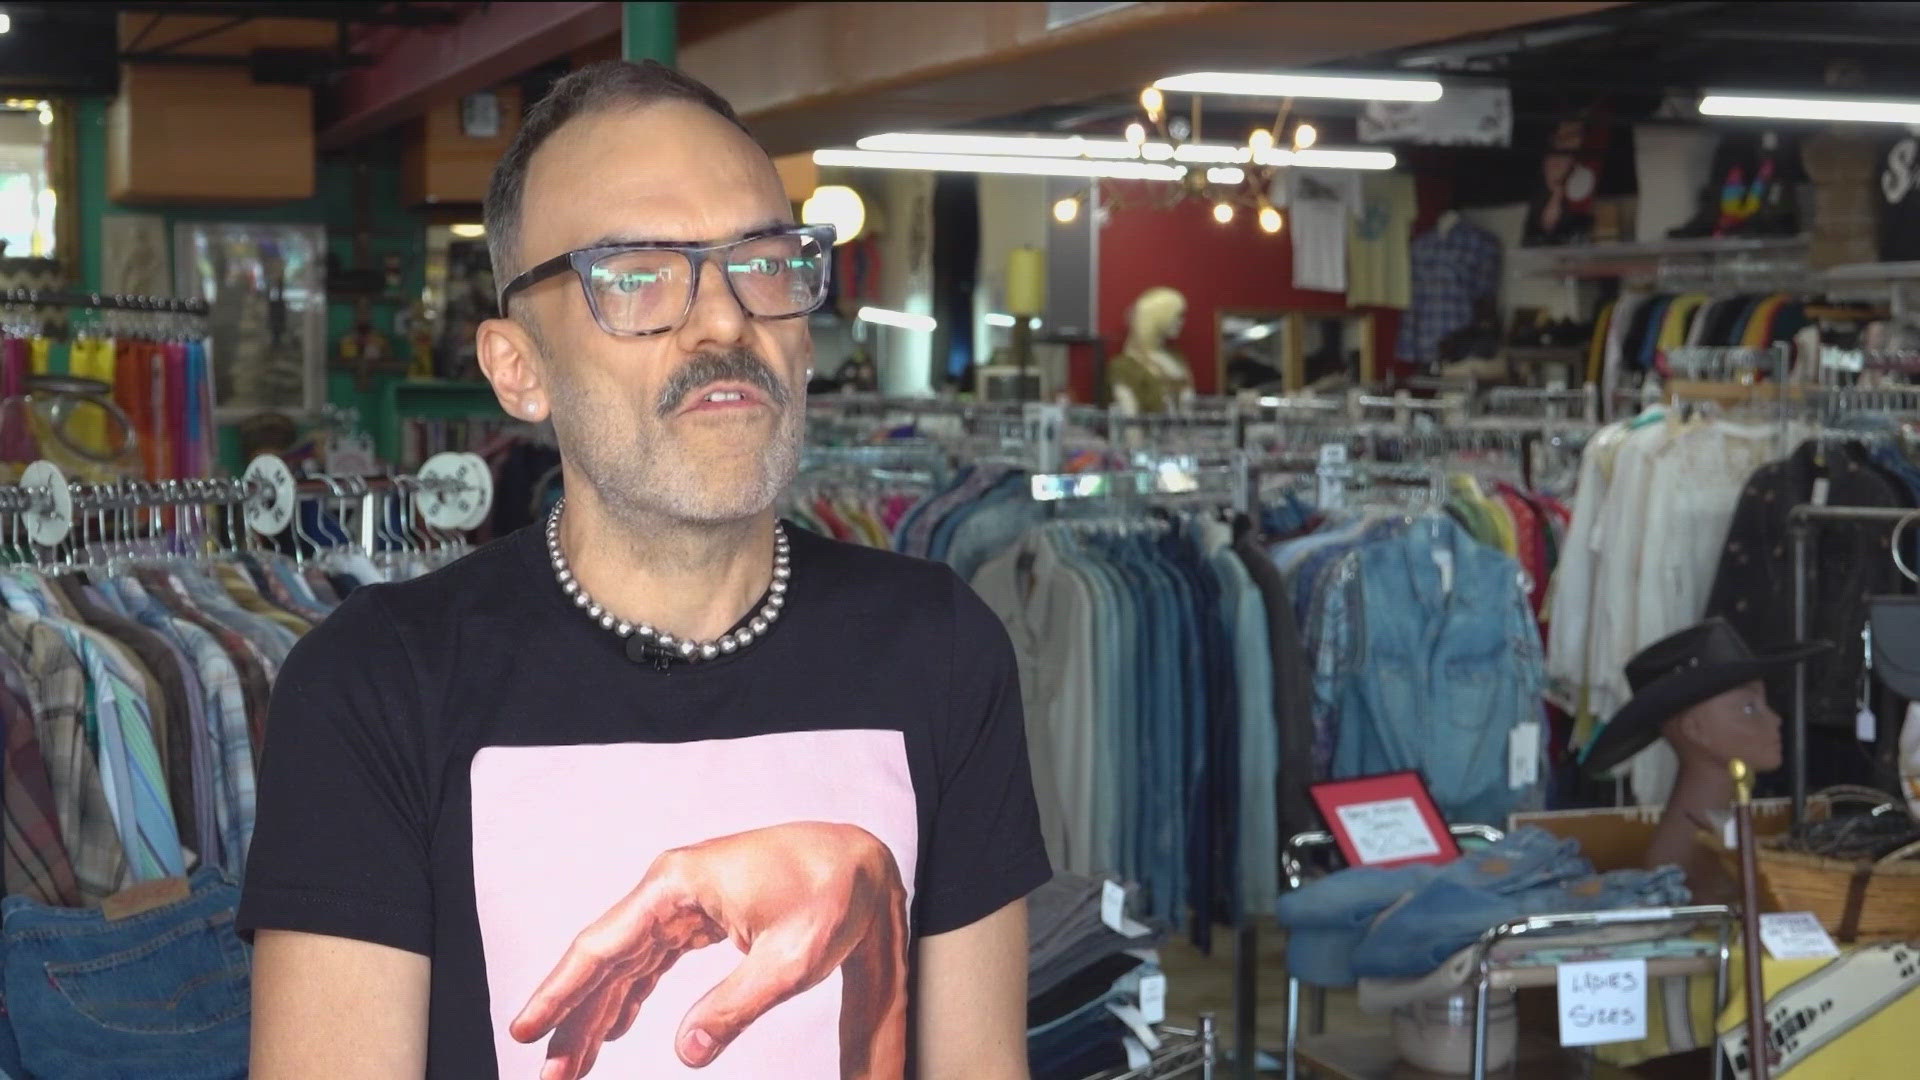 KVUE's Jessica Cha spoke with the folks at Top Drawer Thrift, who take real pride in looking out for their neighbors.